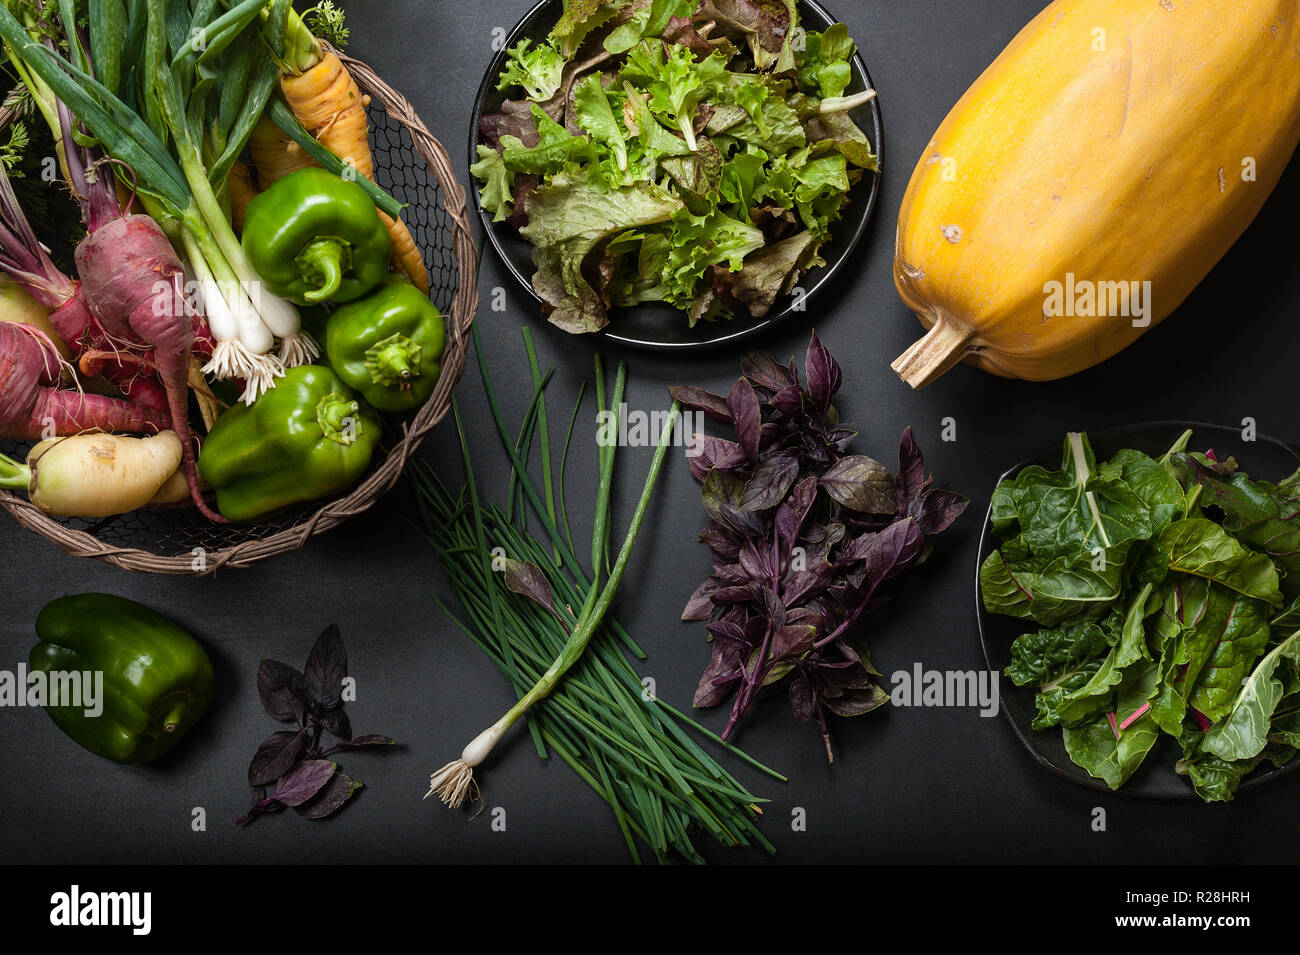 Fresh vegetables including winter squash, chard, mixed lettuce greens, green peppers, onions, carrots, purple basil, and chives on a black background. Stock Photo